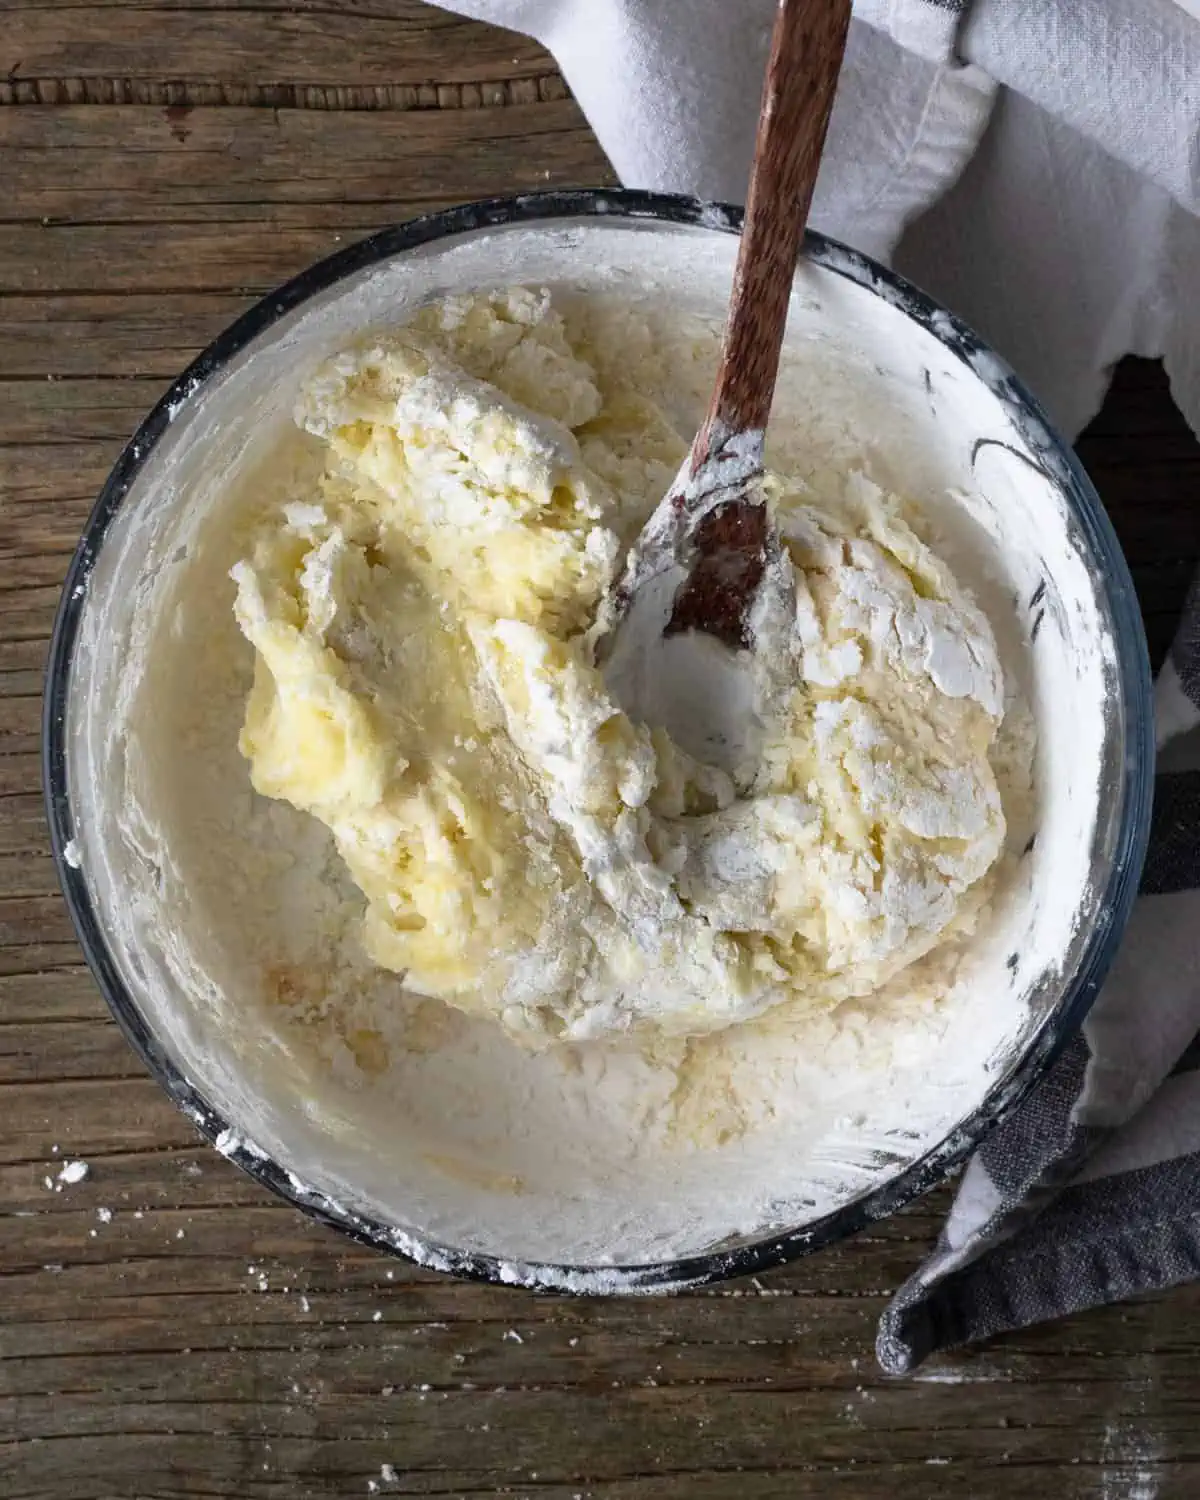 Image of tapioca dough sittig in a glass bowl. the image is for recipe post on how to make these Brazilian snacks.